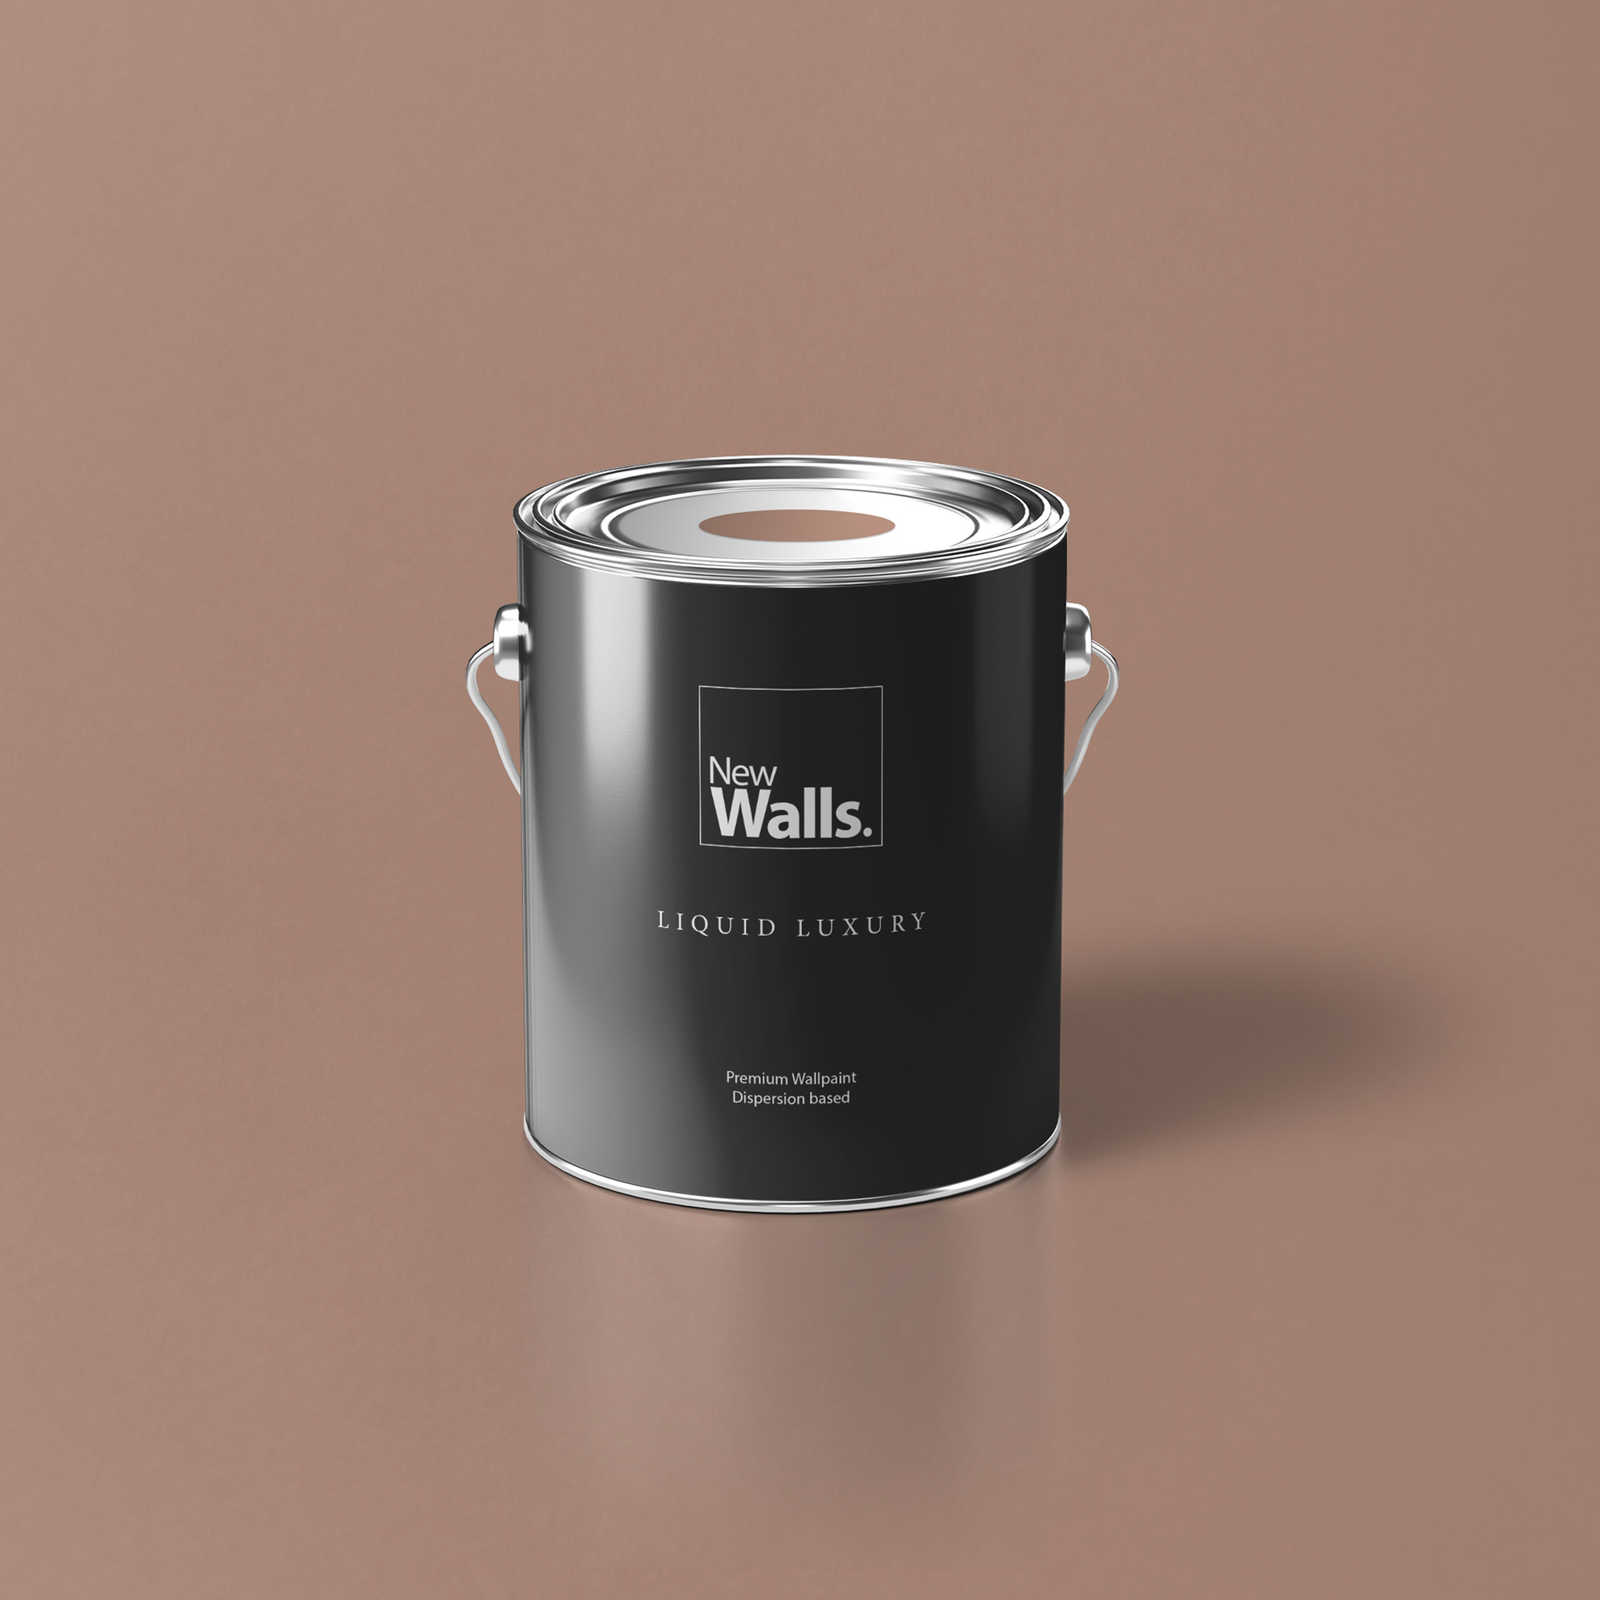 Premium Wall Paint Modest Taupe »Natural Nude« NW1011 – 2.5 litre
